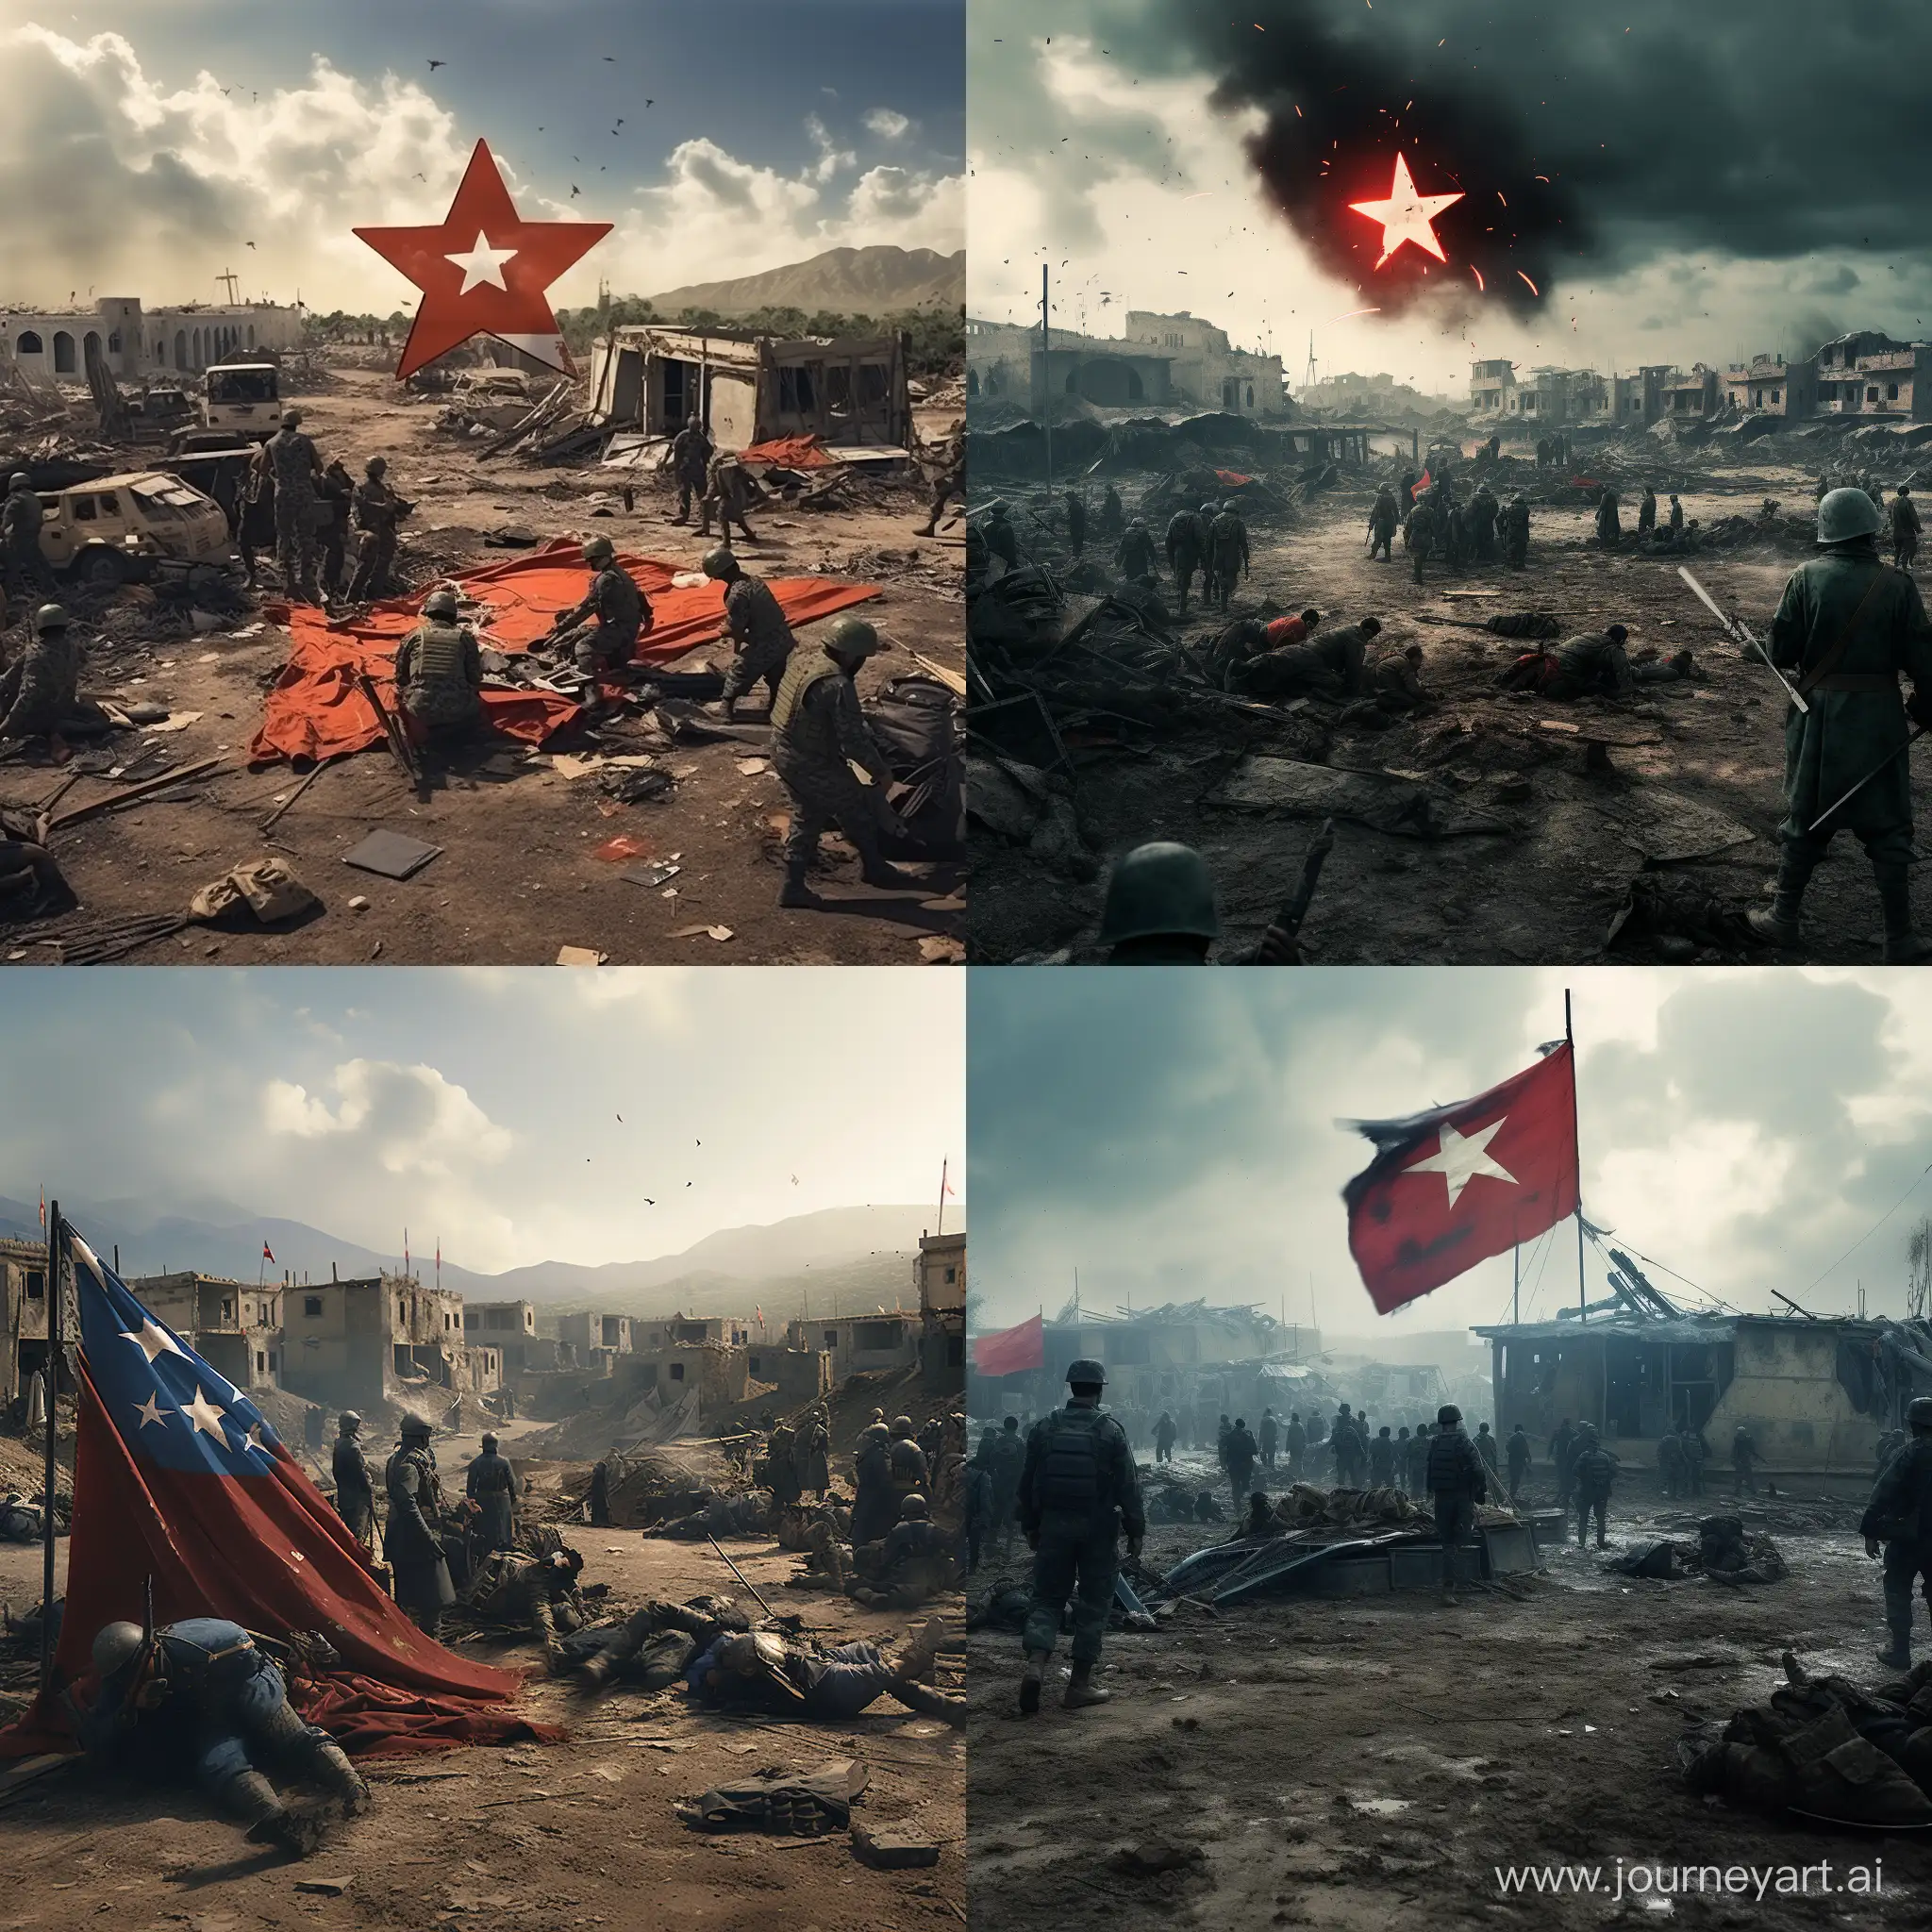 a modern and crowd army preparing thier tanks, artilleries, MRLs and personal rifles for battle in the  battlefied, a green turkish flag there, There are dead soldiers on the ground and shattered flags with a blue six-pointed star on them, cinematic